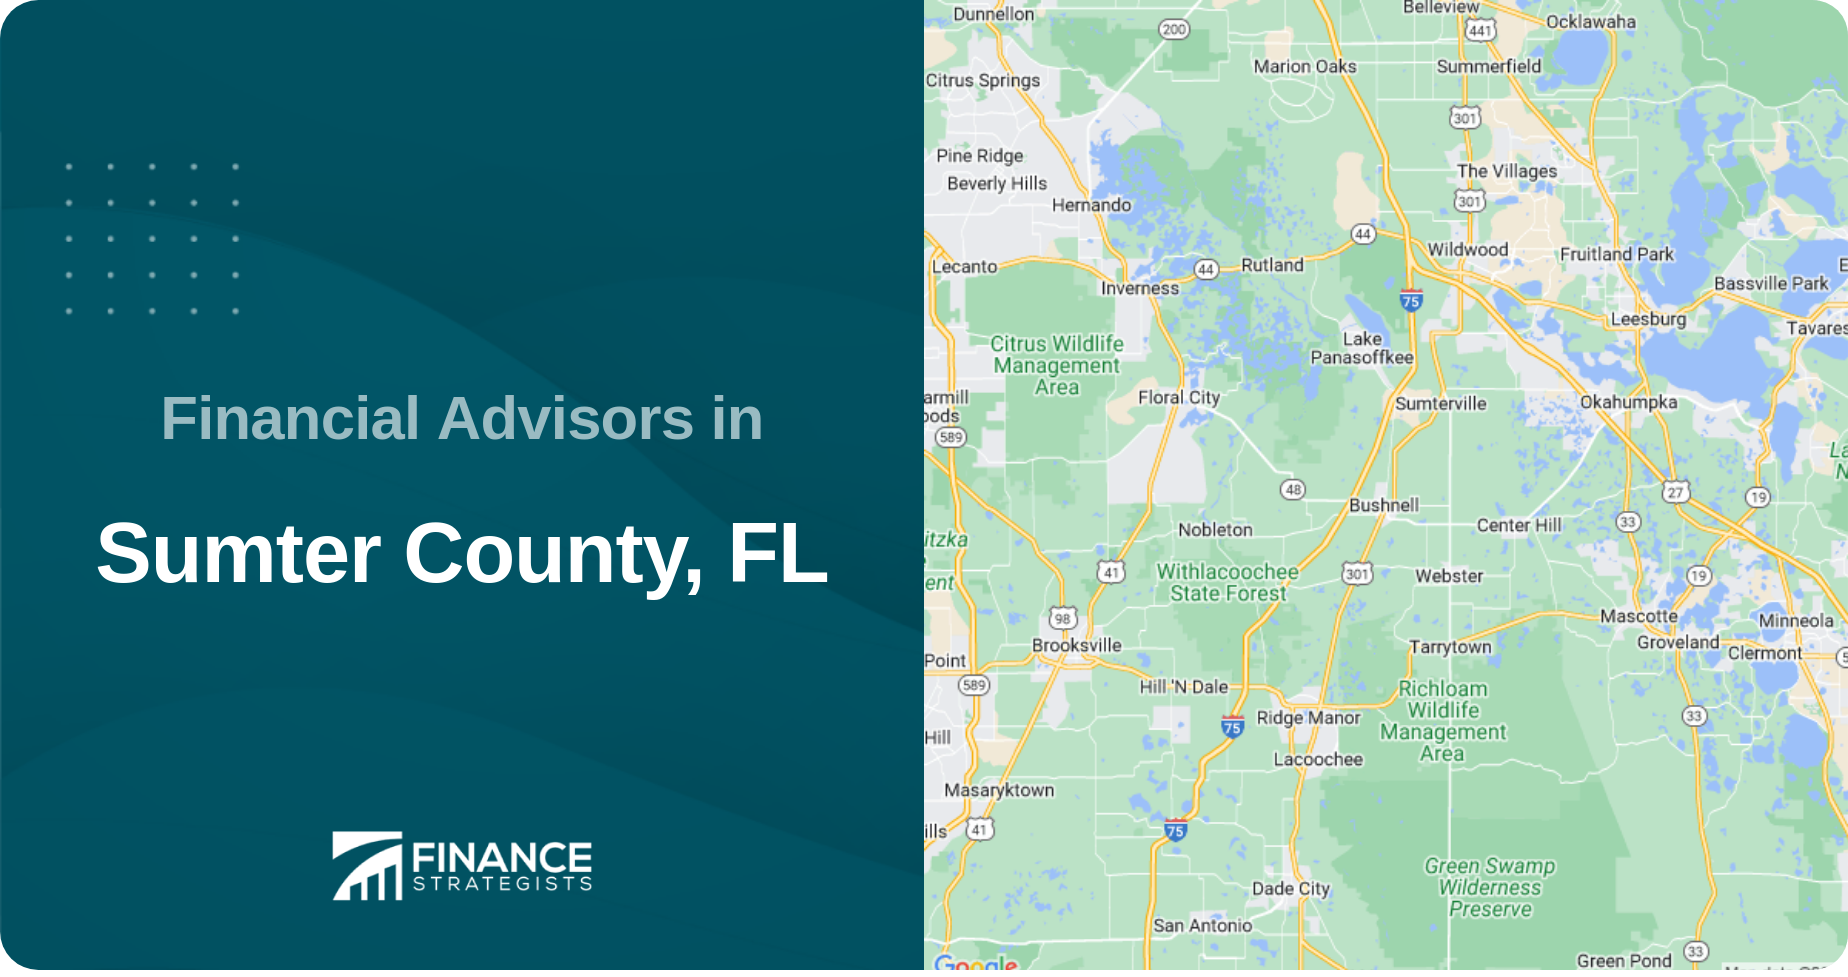 Financial Advisors in Sumter County, FL